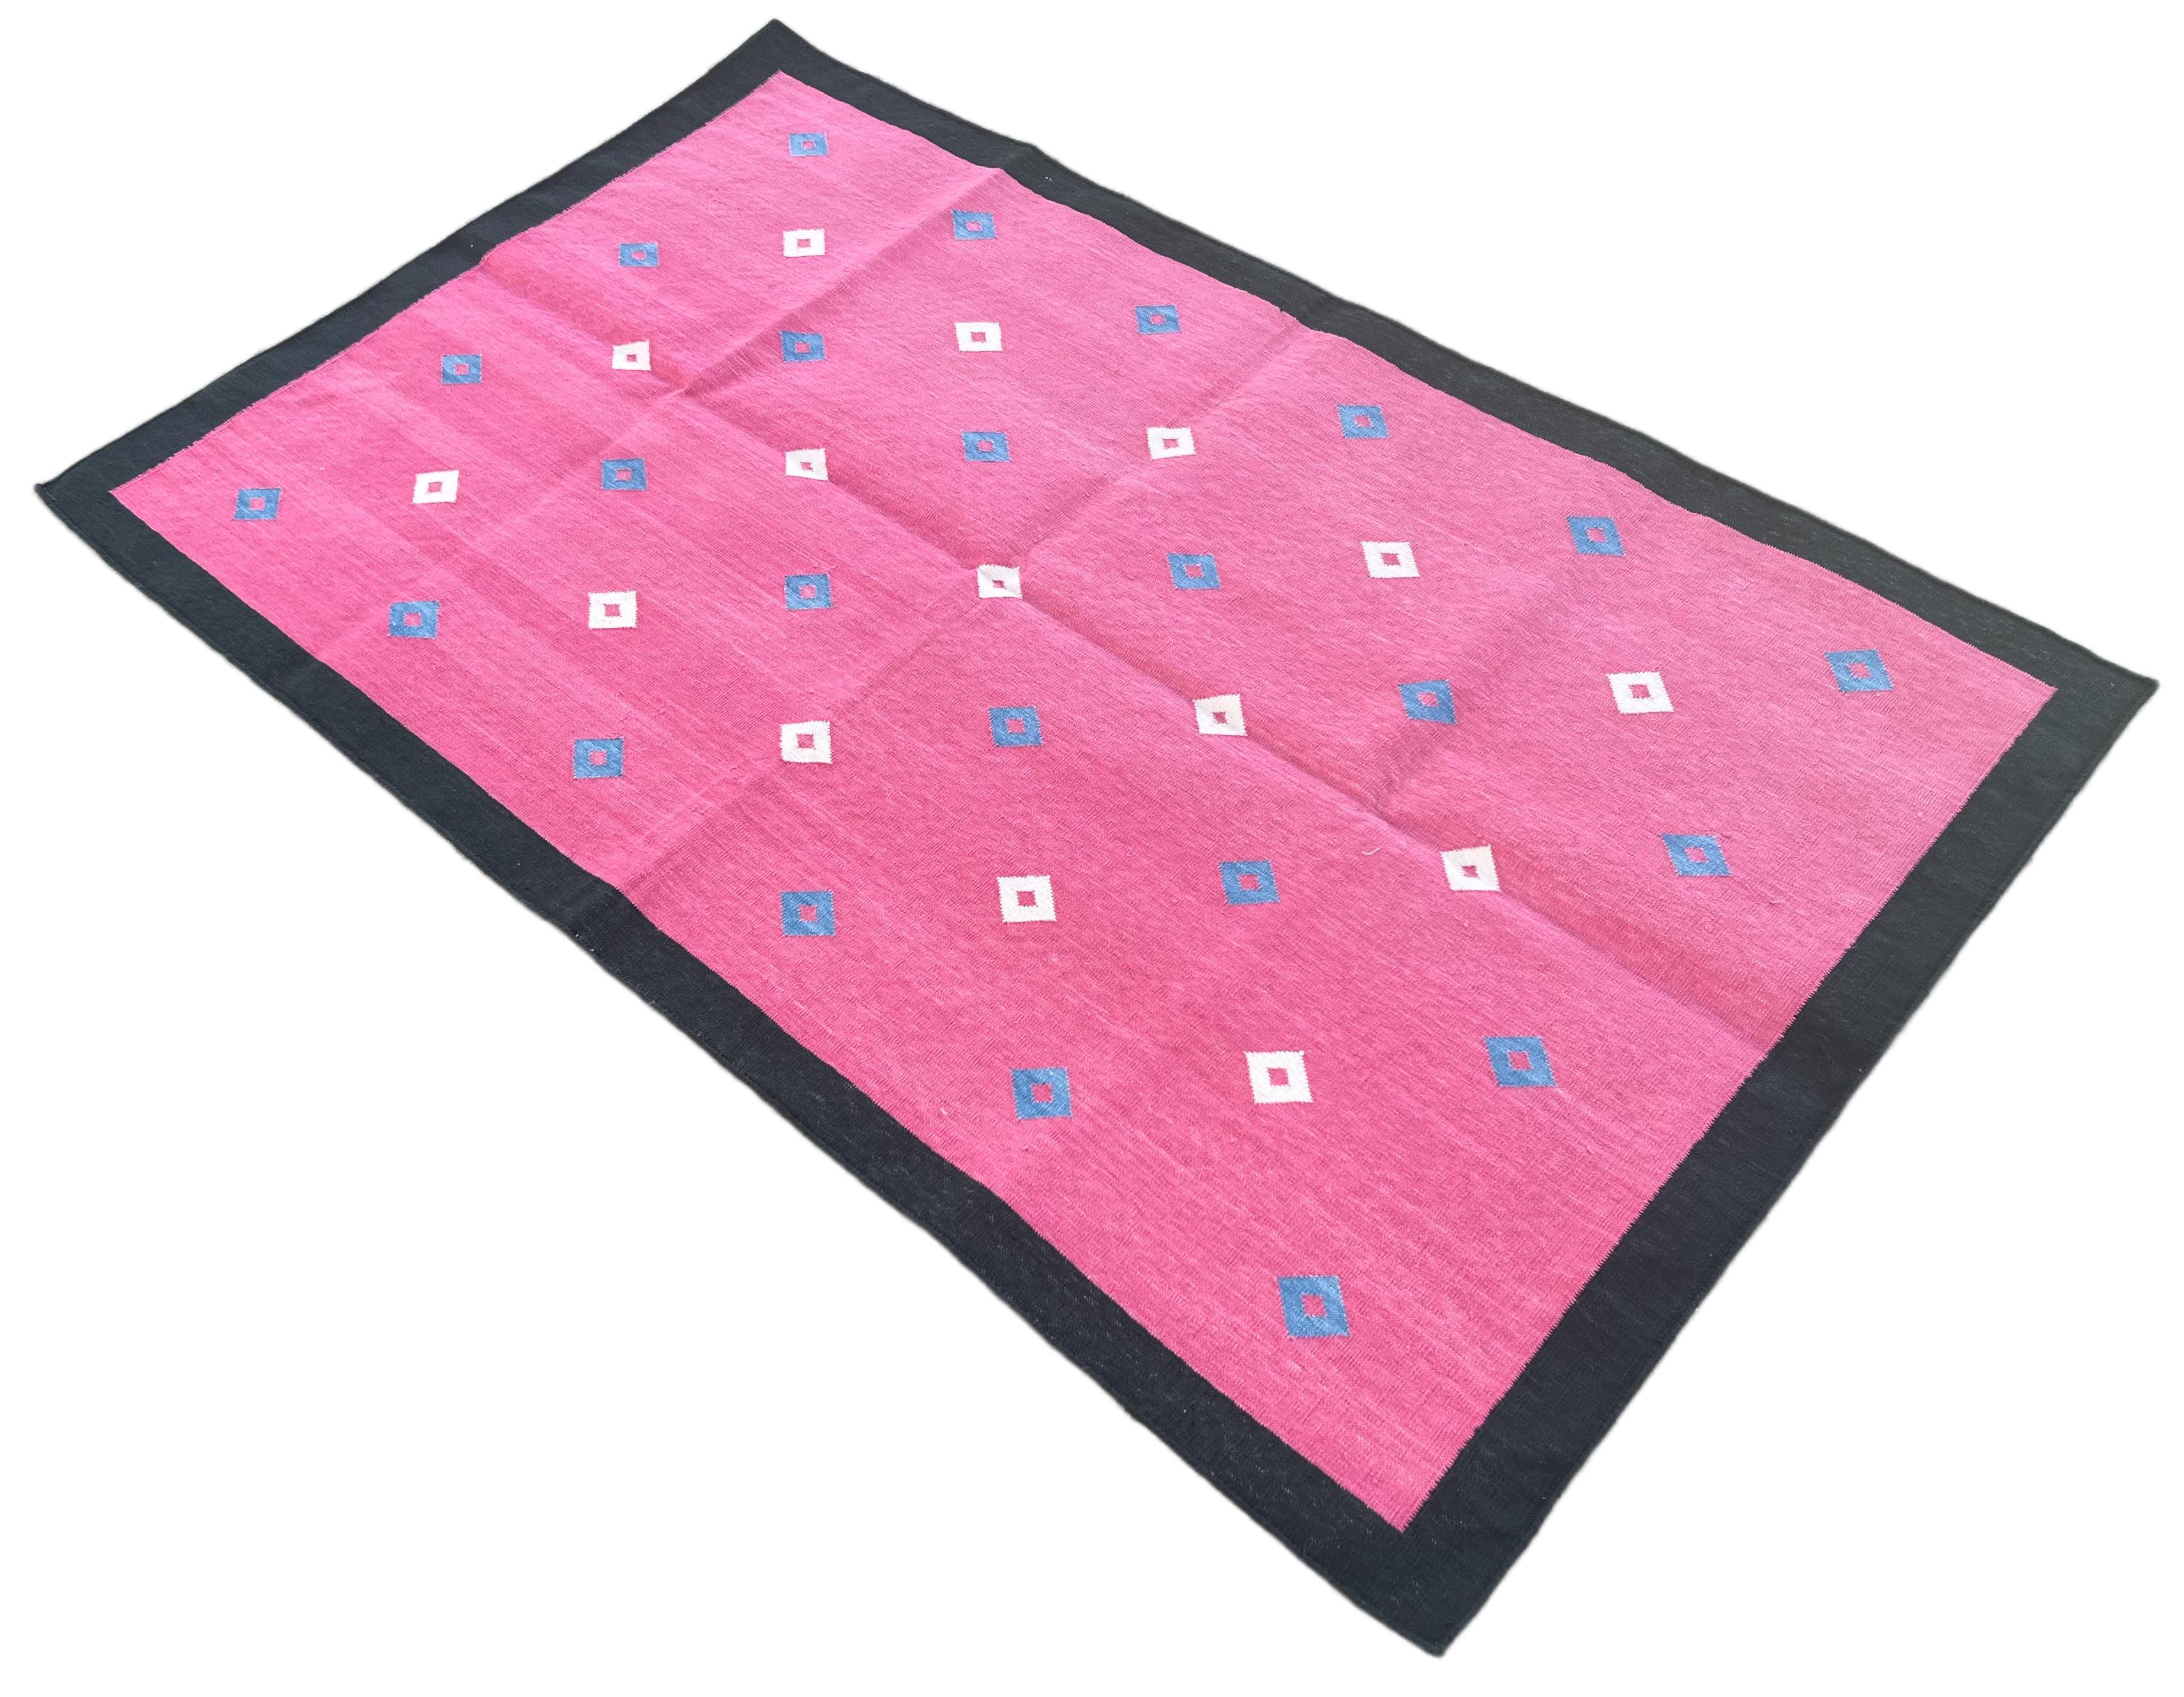 Cotton Vegetable Dyed Pink And Black Diamond Indian Dhurrie Rug-3'x5' 
These special flat-weave dhurries are hand-woven with 15 ply 100% cotton yarn. Due to the special manufacturing techniques used to create our rugs, the size and color of each